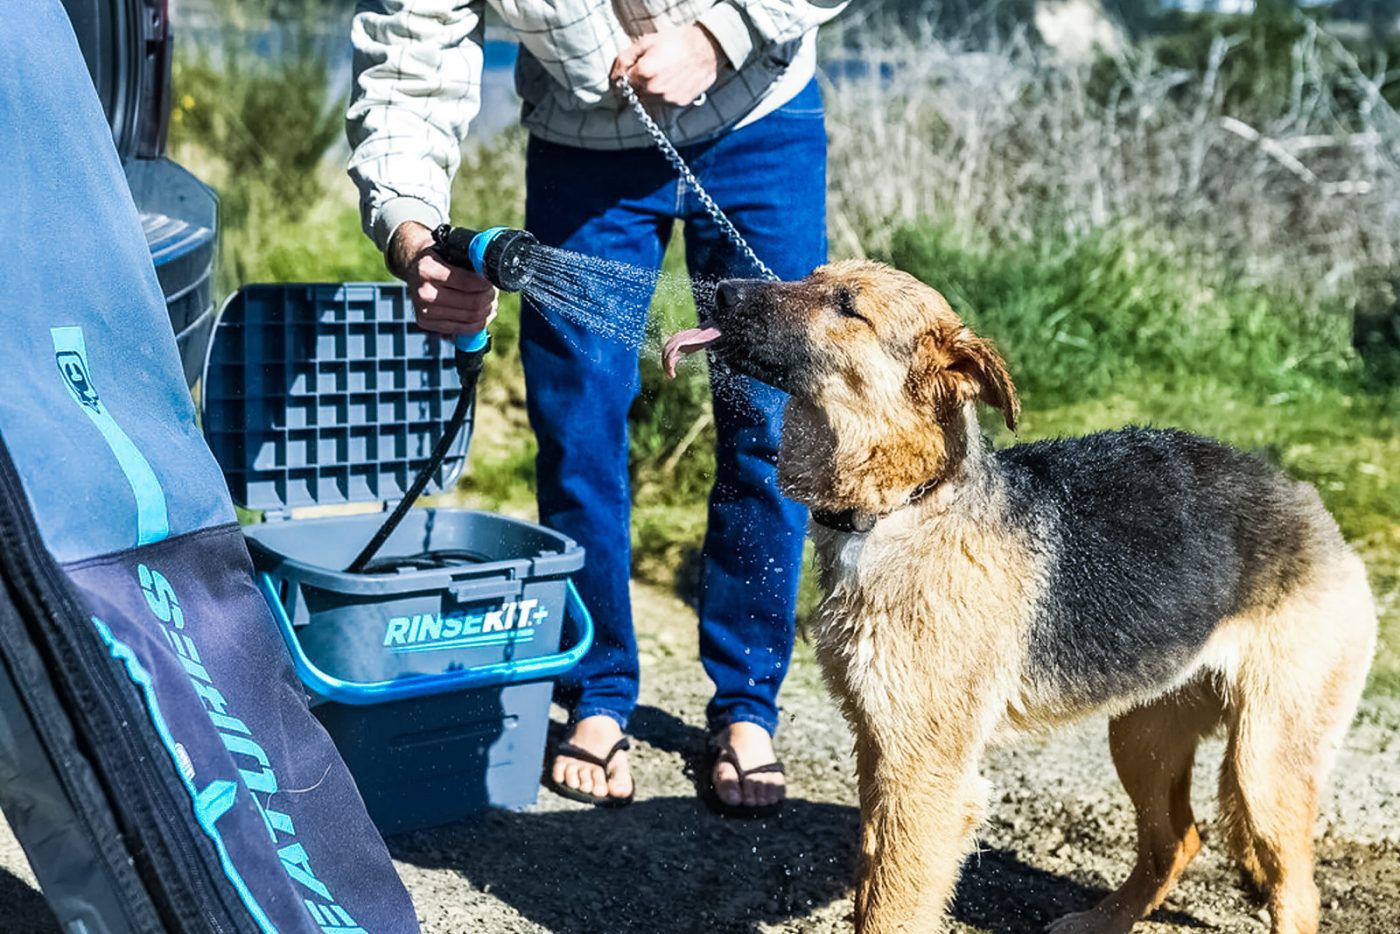 Orders Increase for RinseKit as Portable Showers for K9 Units